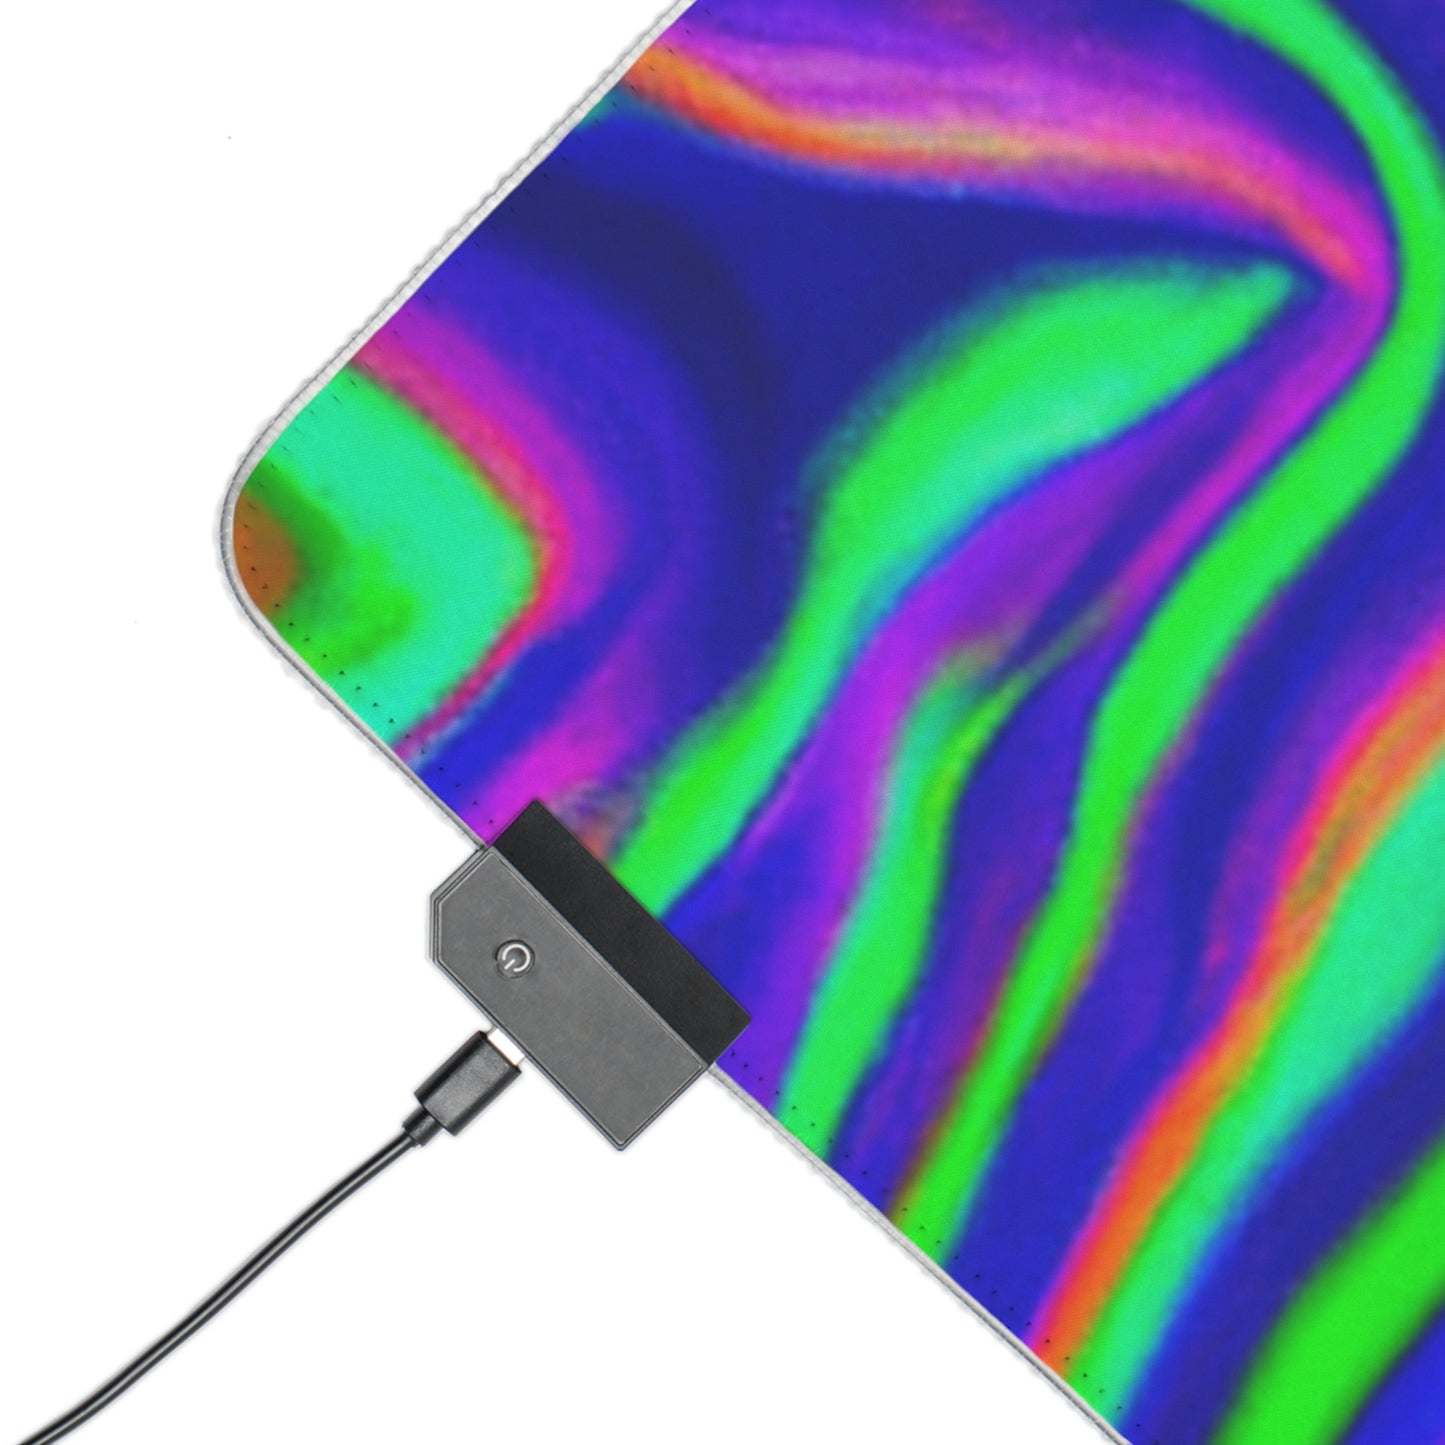 Mozart McChimney - Psychedelic Trippy LED Light Up Gaming Mouse Pad